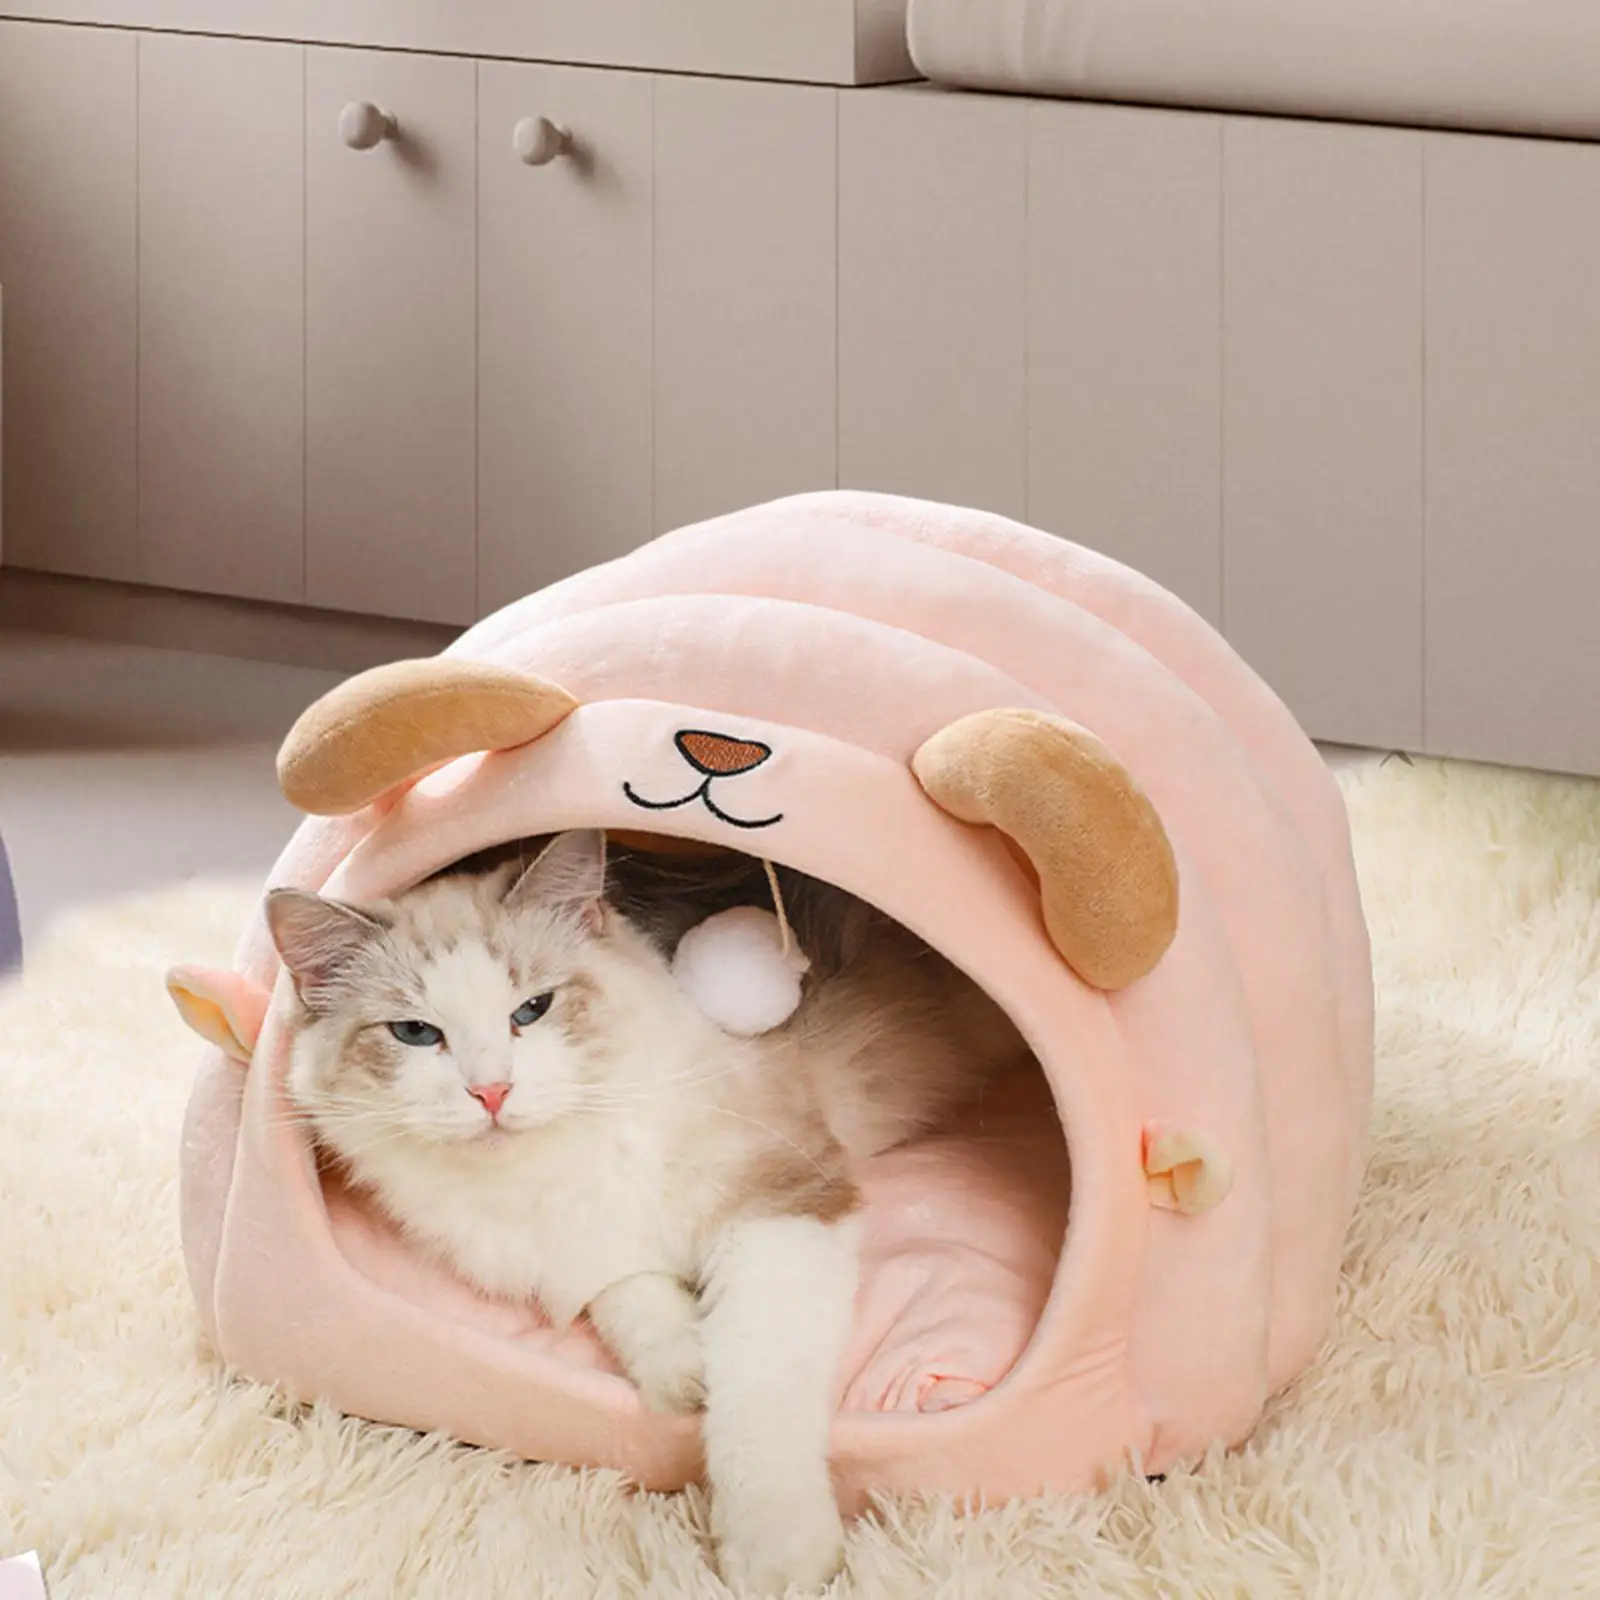 with Removable Mat Washable Cave House Small Animal Winter House for Kitty Kittens or Small Dogs Rabbits Indoor Outdoor